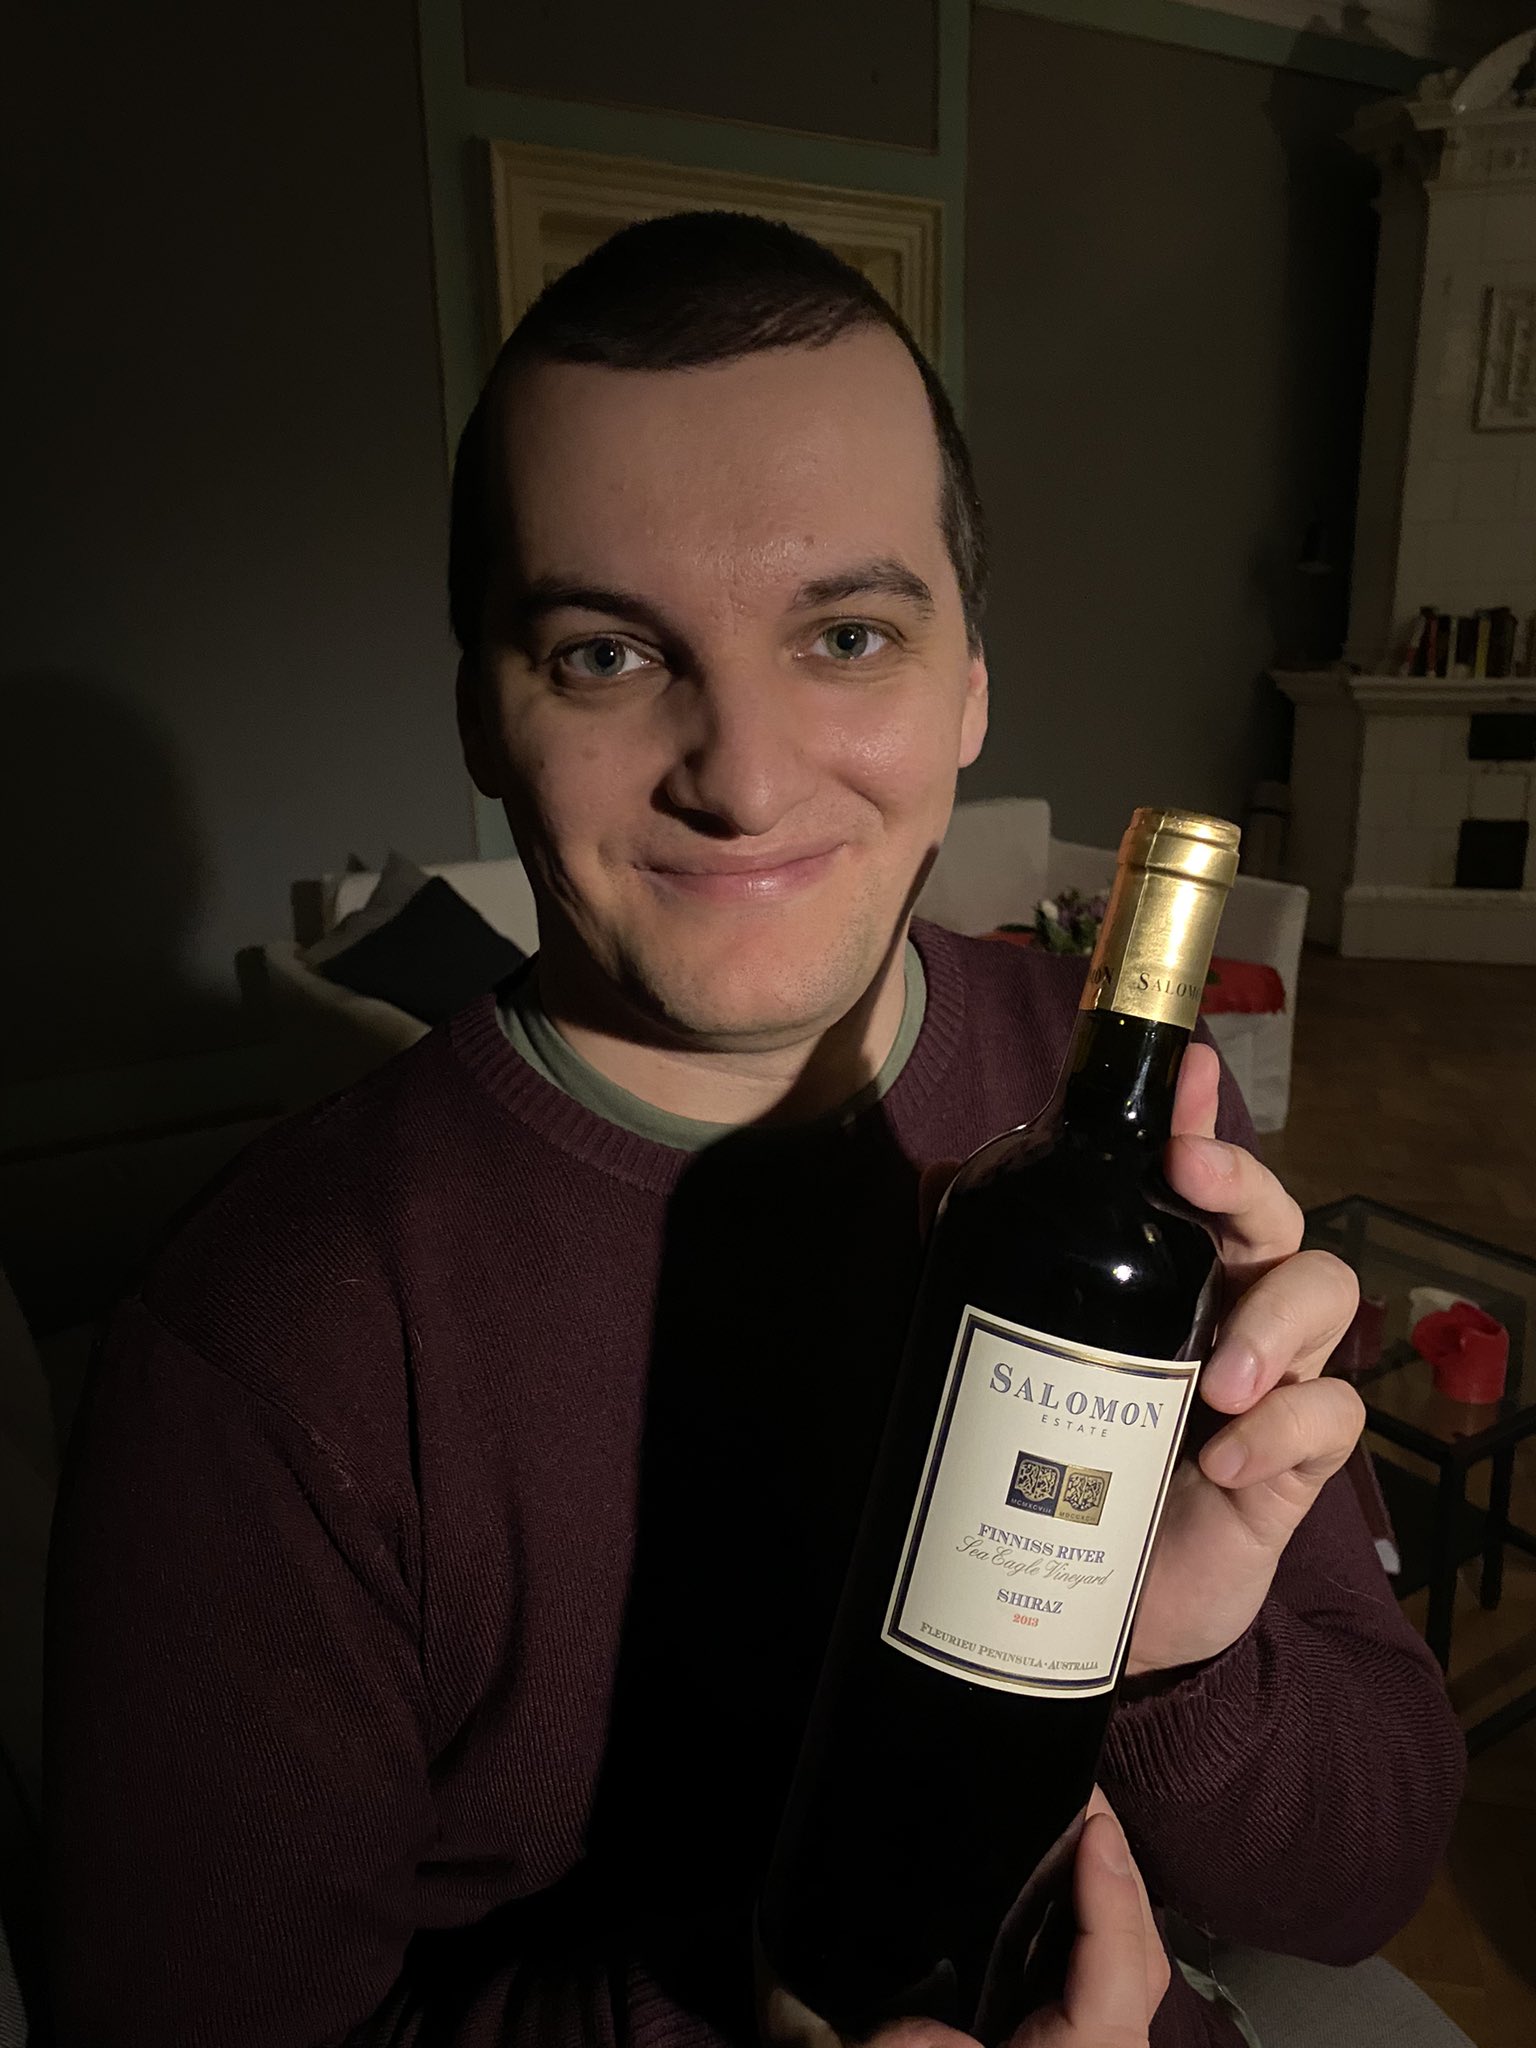 Janda on Twitter: "Today drink Australian wine in solidarity with our friends are bullied by Chinese Join this #FreedomWine campign launched by @edwardlucas. Thanks to @AusAmbPoland! https://t.co/zebteXcFWU" /